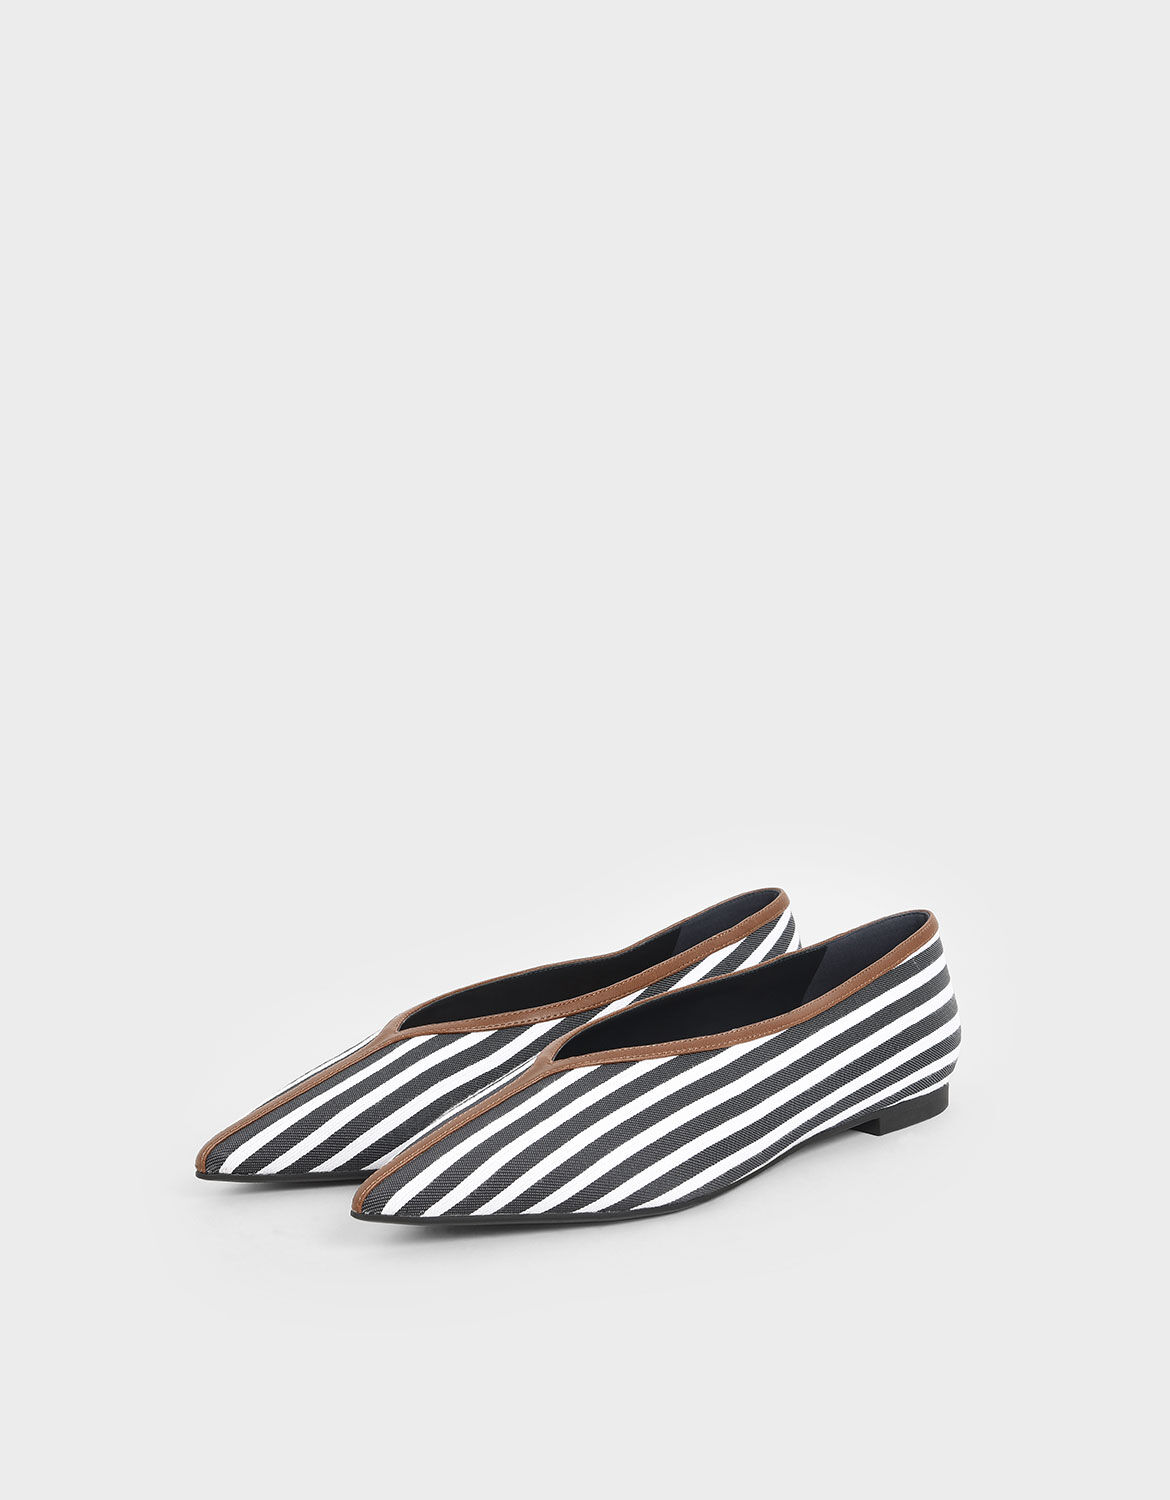 black and white striped flats